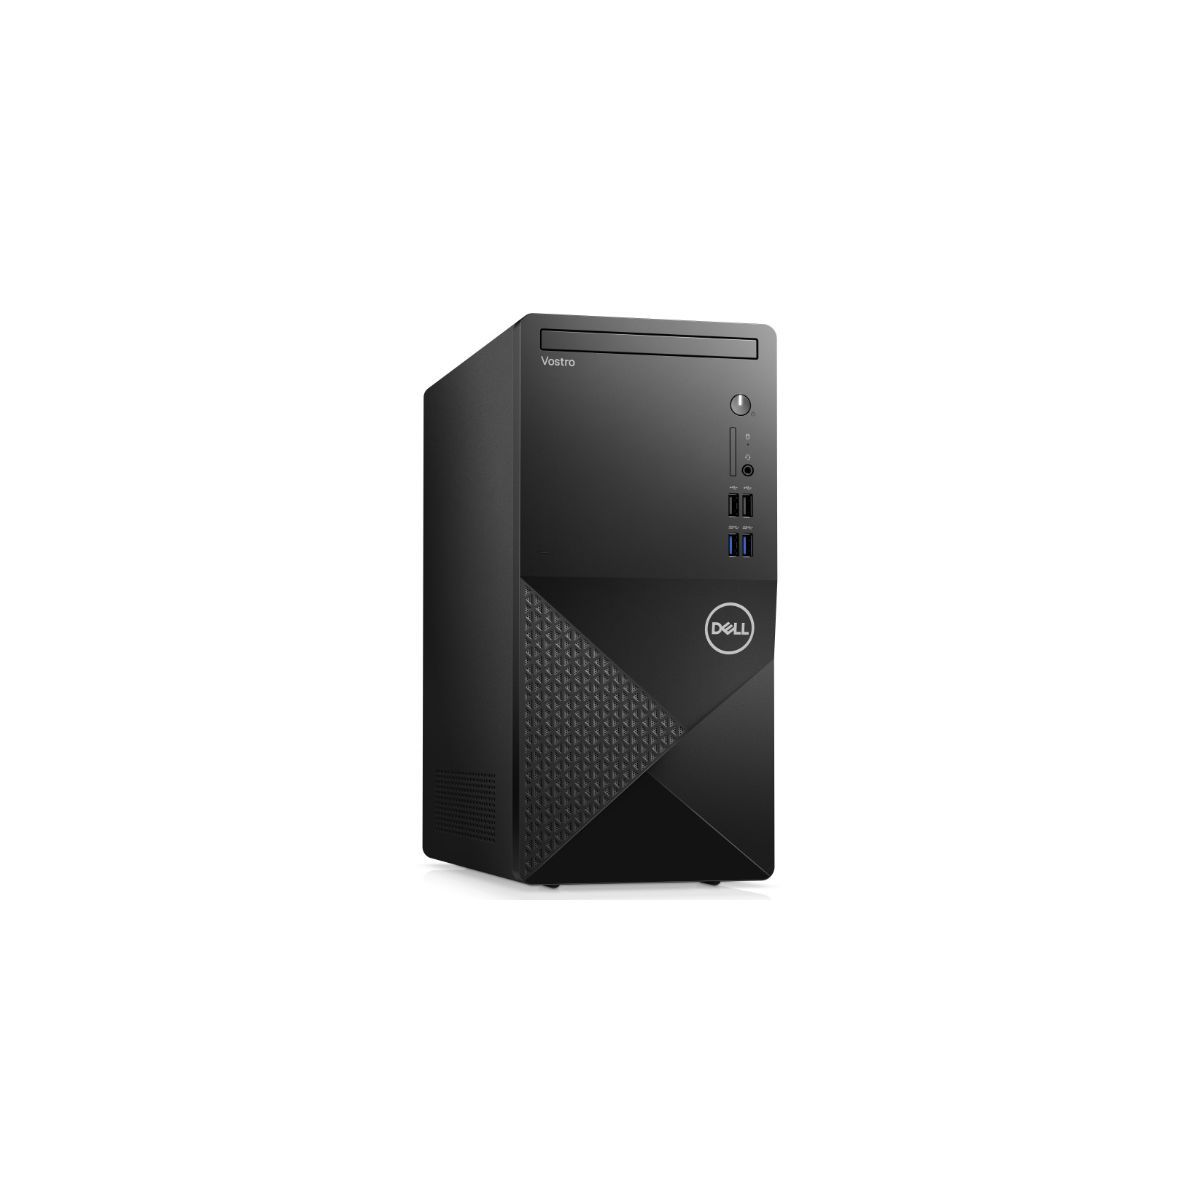 Desktop Vostro 3020 MT, 180W PSU Black Chassis (Silver Mesh) with TPM, 13th Gen Intel(R) Core(TM) i3-13100 processor (4-Core, 12MB Cache, 3.4 GHz to 4.5 GHz), Intel(R) UHD Graphics 730 with shared graphics memory , 8GB, 8Gx1, DDR4, 3200MHz, 256GB M.2 PCIe NVMe Solid State Drive, No Optical Drive_2